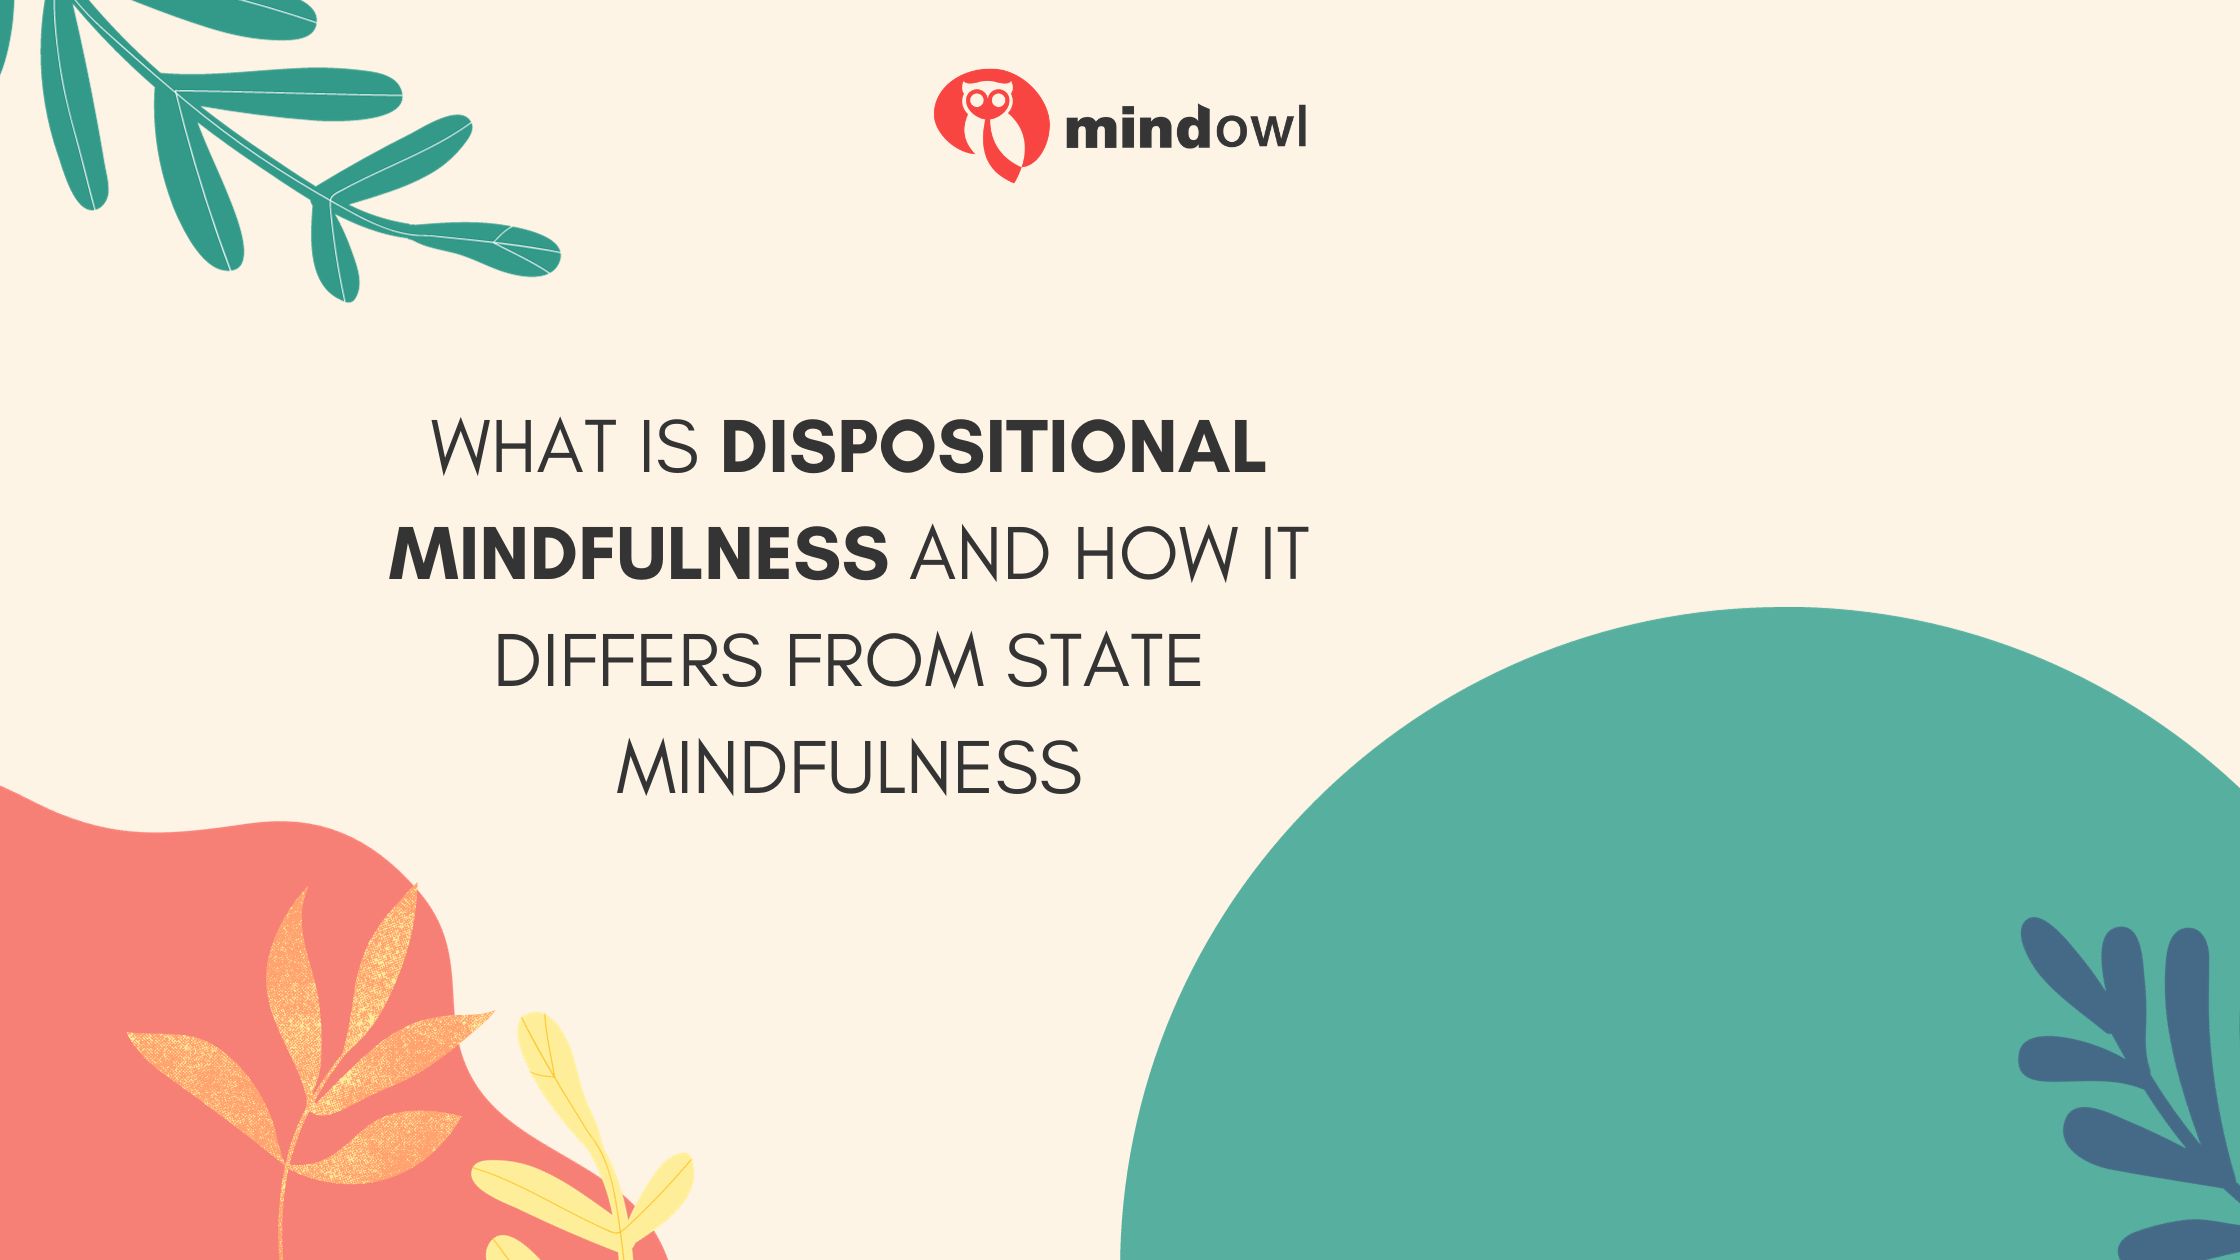 What Is Dispositional Mindfulness and How It Differs From State Mindfulness